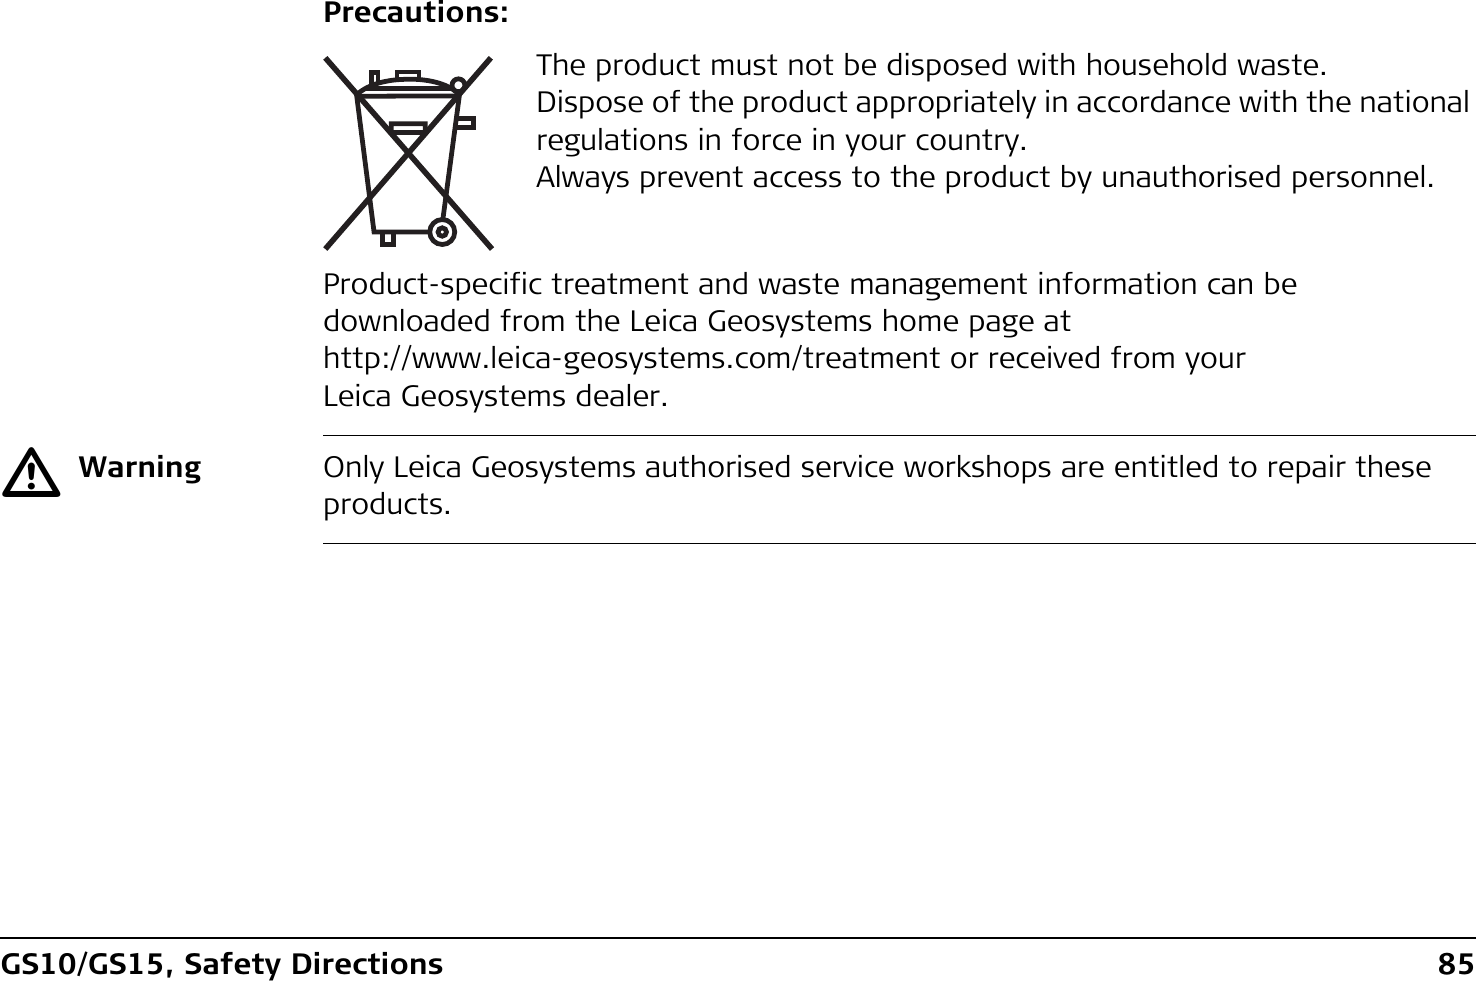 GS10/GS15, Safety Directions 85Precautions:Product-specific treatment and waste management information can be downloaded from the Leica Geosystems home page at http://www.leica-geosystems.com/treatment or received from your Leica Geosystems dealer.ƽWarning Only Leica Geosystems authorised service workshops are entitled to repair these products.The product must not be disposed with household waste.Dispose of the product appropriately in accordance with the national regulations in force in your country.Always prevent access to the product by unauthorised personnel.